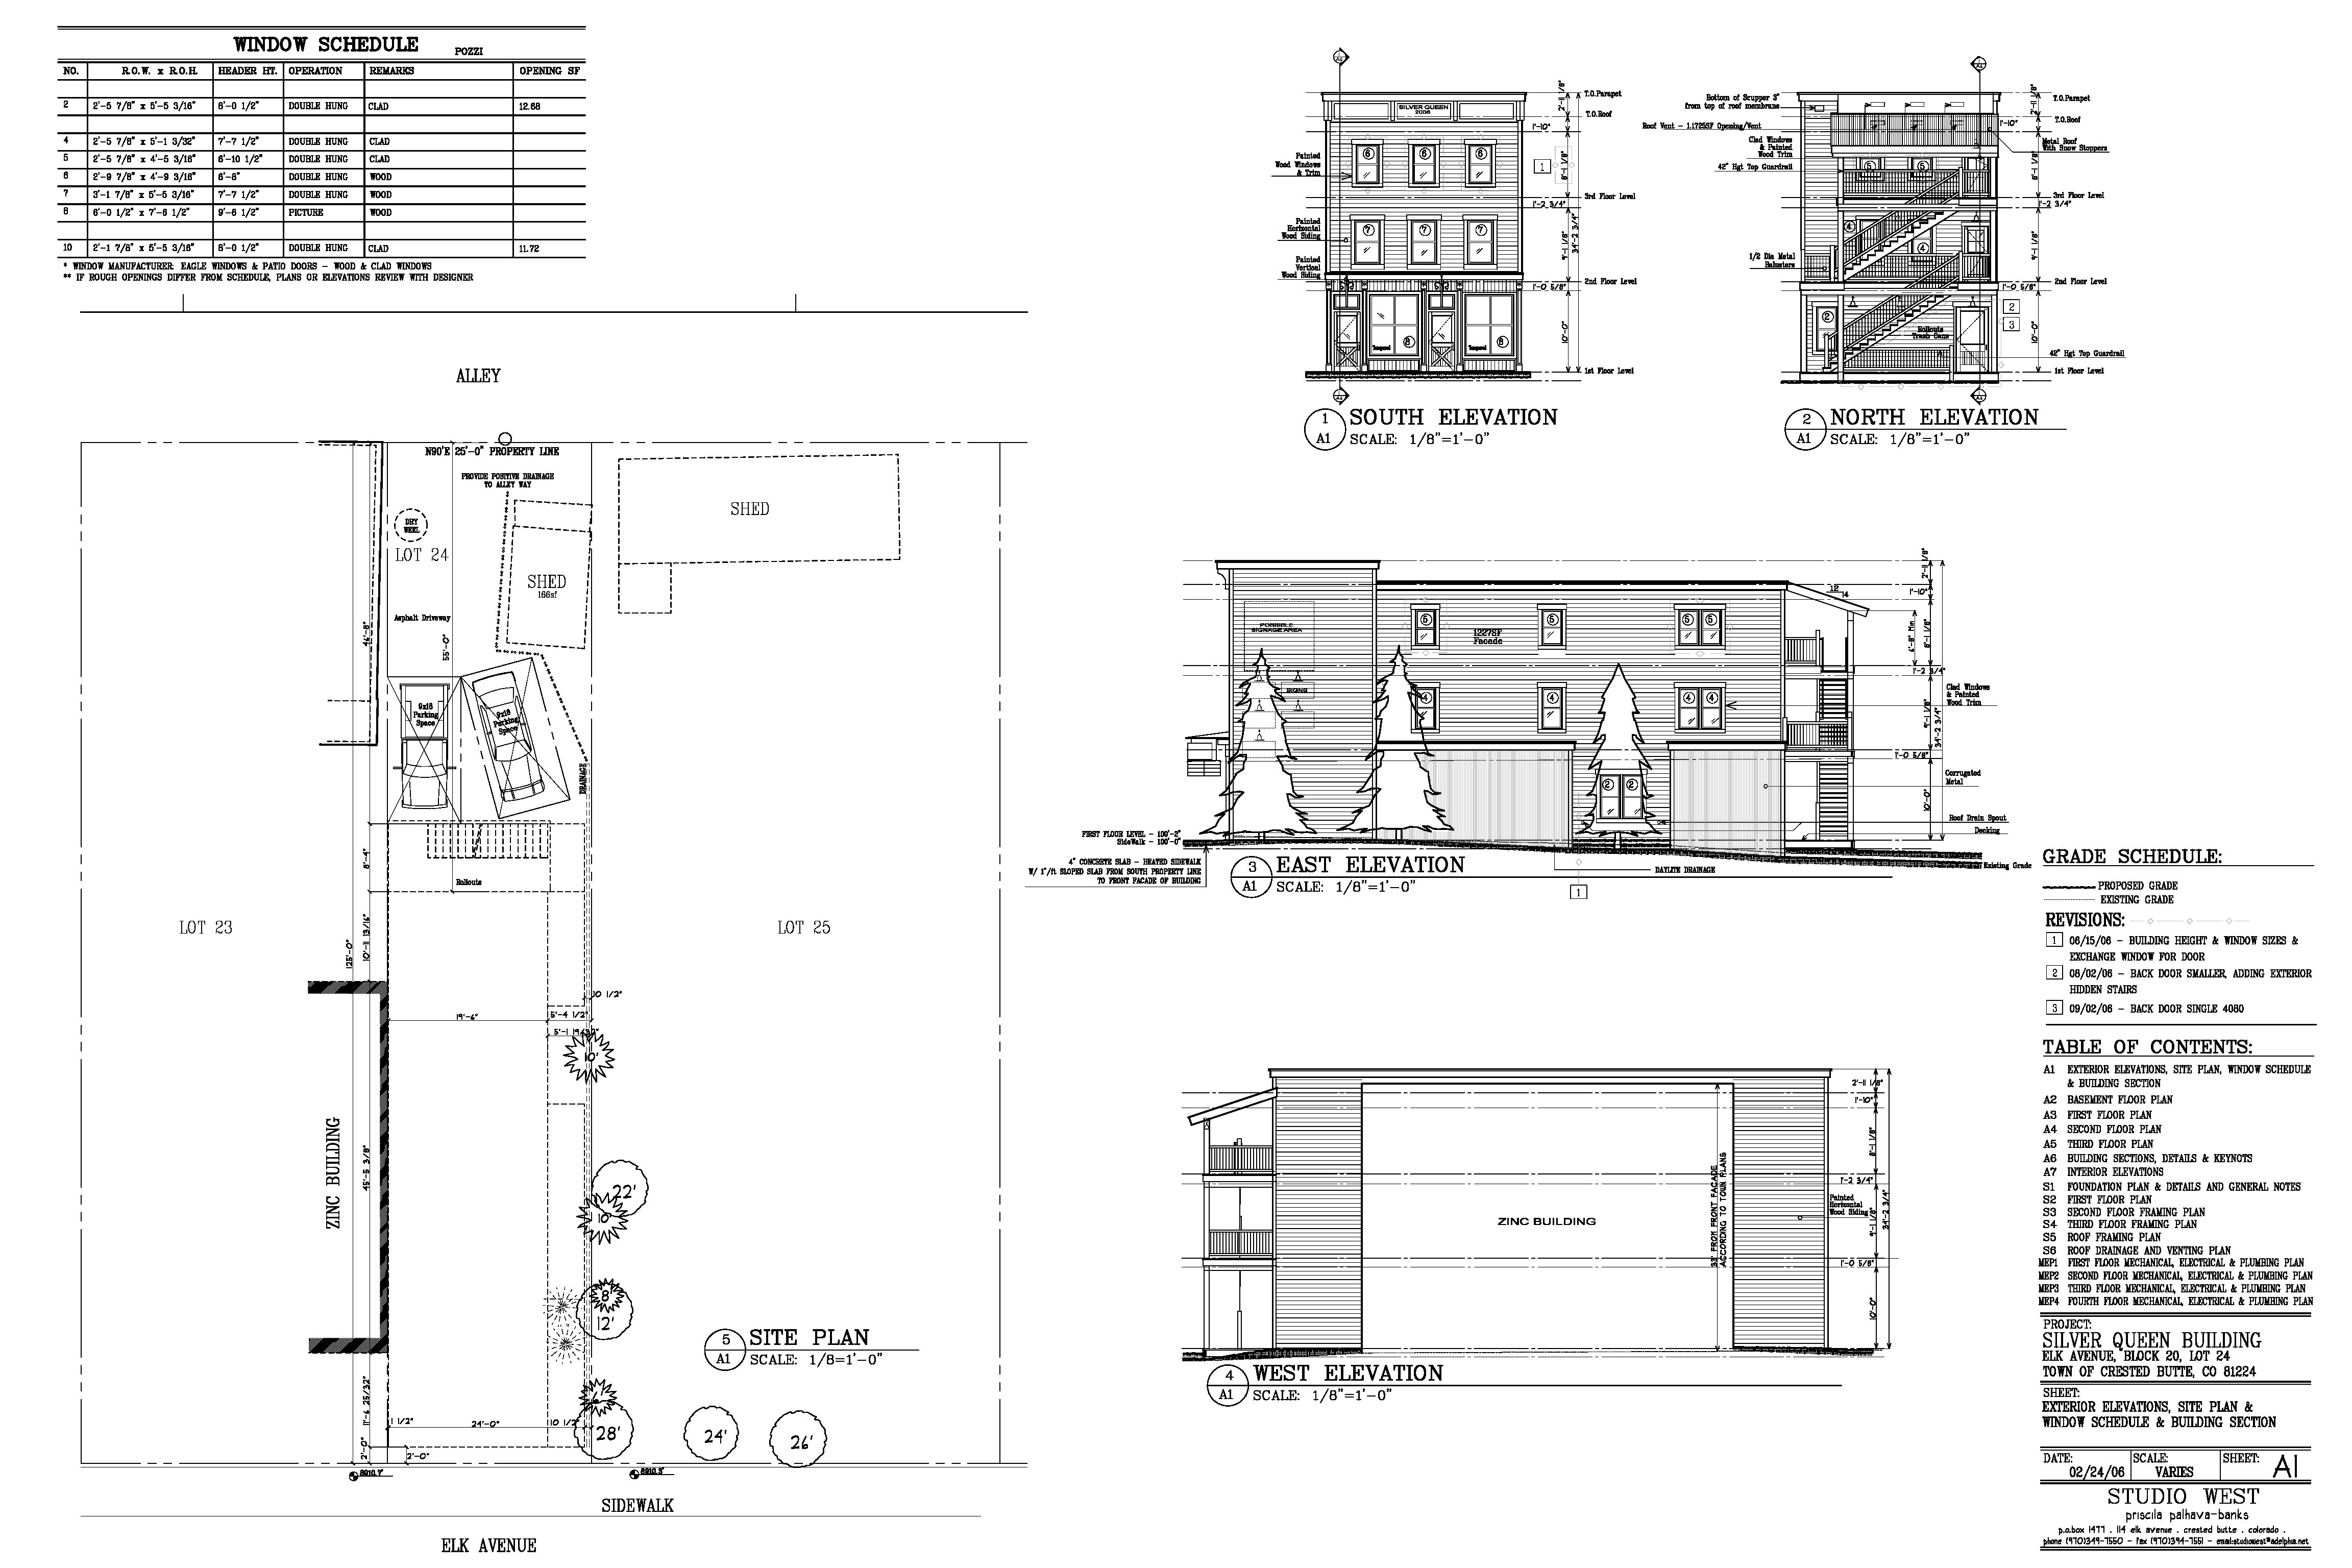 construction drawings, Studio West